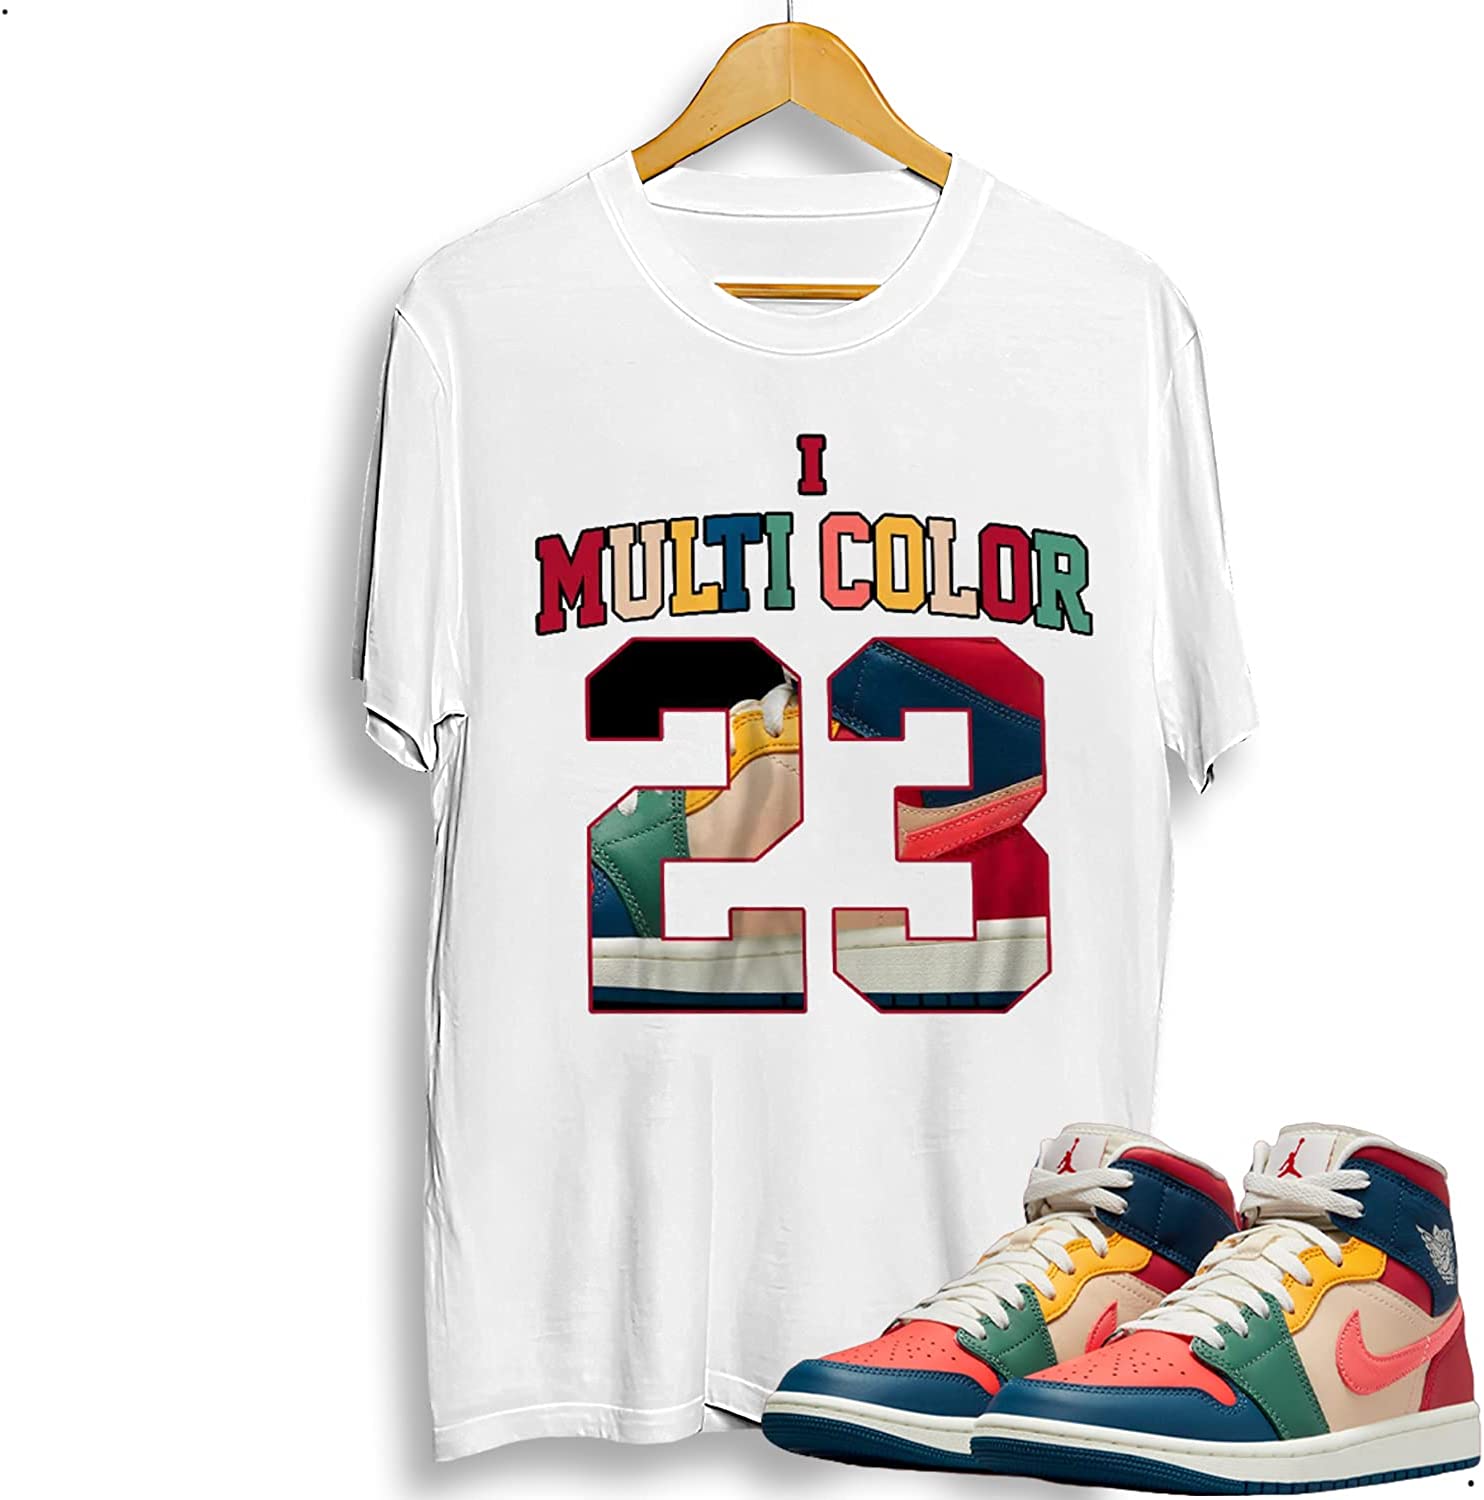 Number 23 G.o.a.t Shoes T Shirts to Match J0rdan 1 Mid Multi Color 2022, Matching for Sneaker J0rdan 1 Mid Multi Color 2022, Shirts for Sneaker J0rdan 1 Mid Multi Color 2022 Gift for Men Women – JOT030